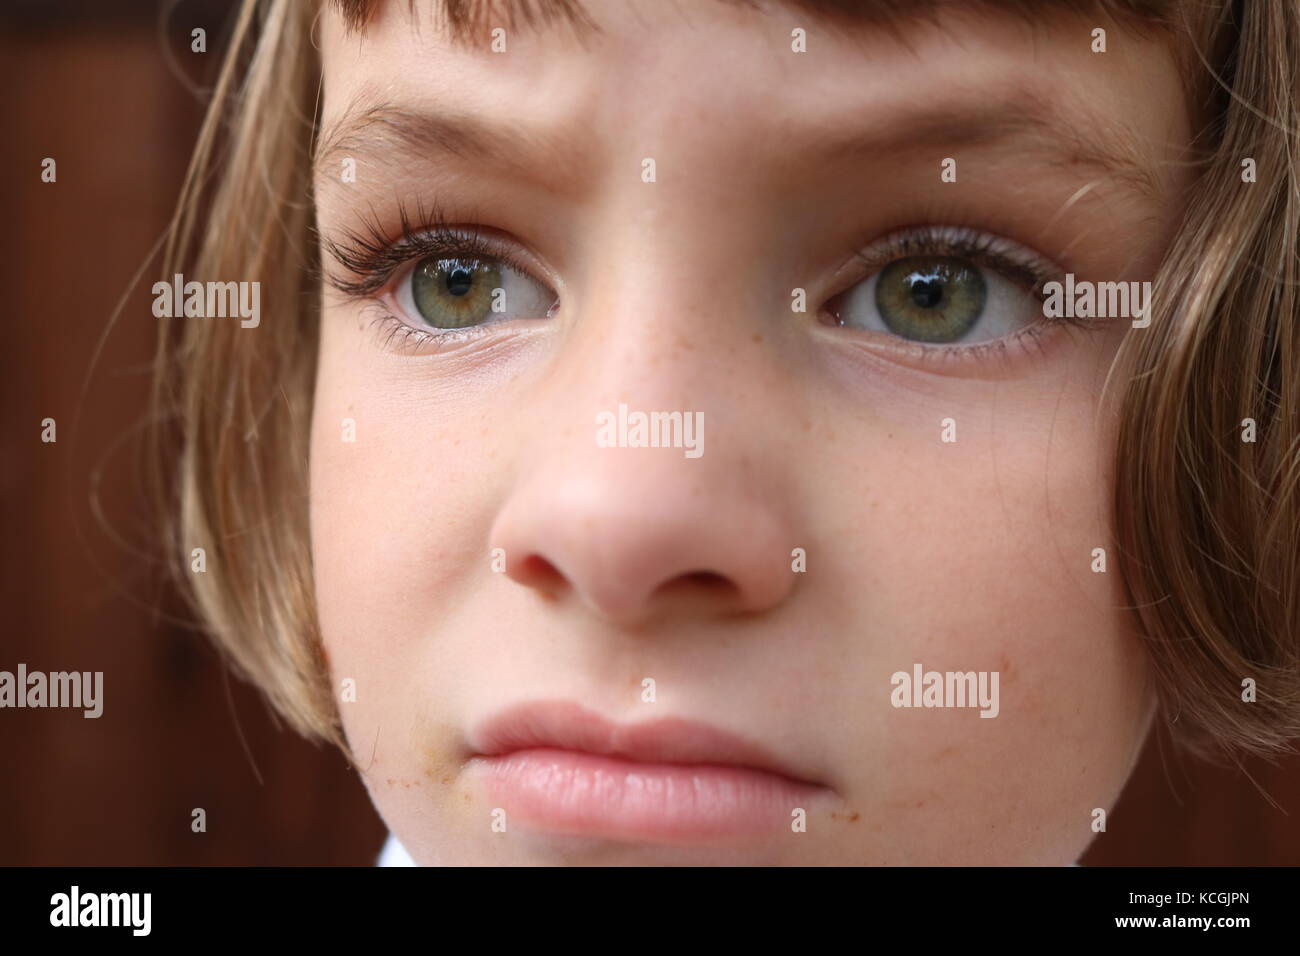 Close up portrait of a frustrated young girl Stock Photo